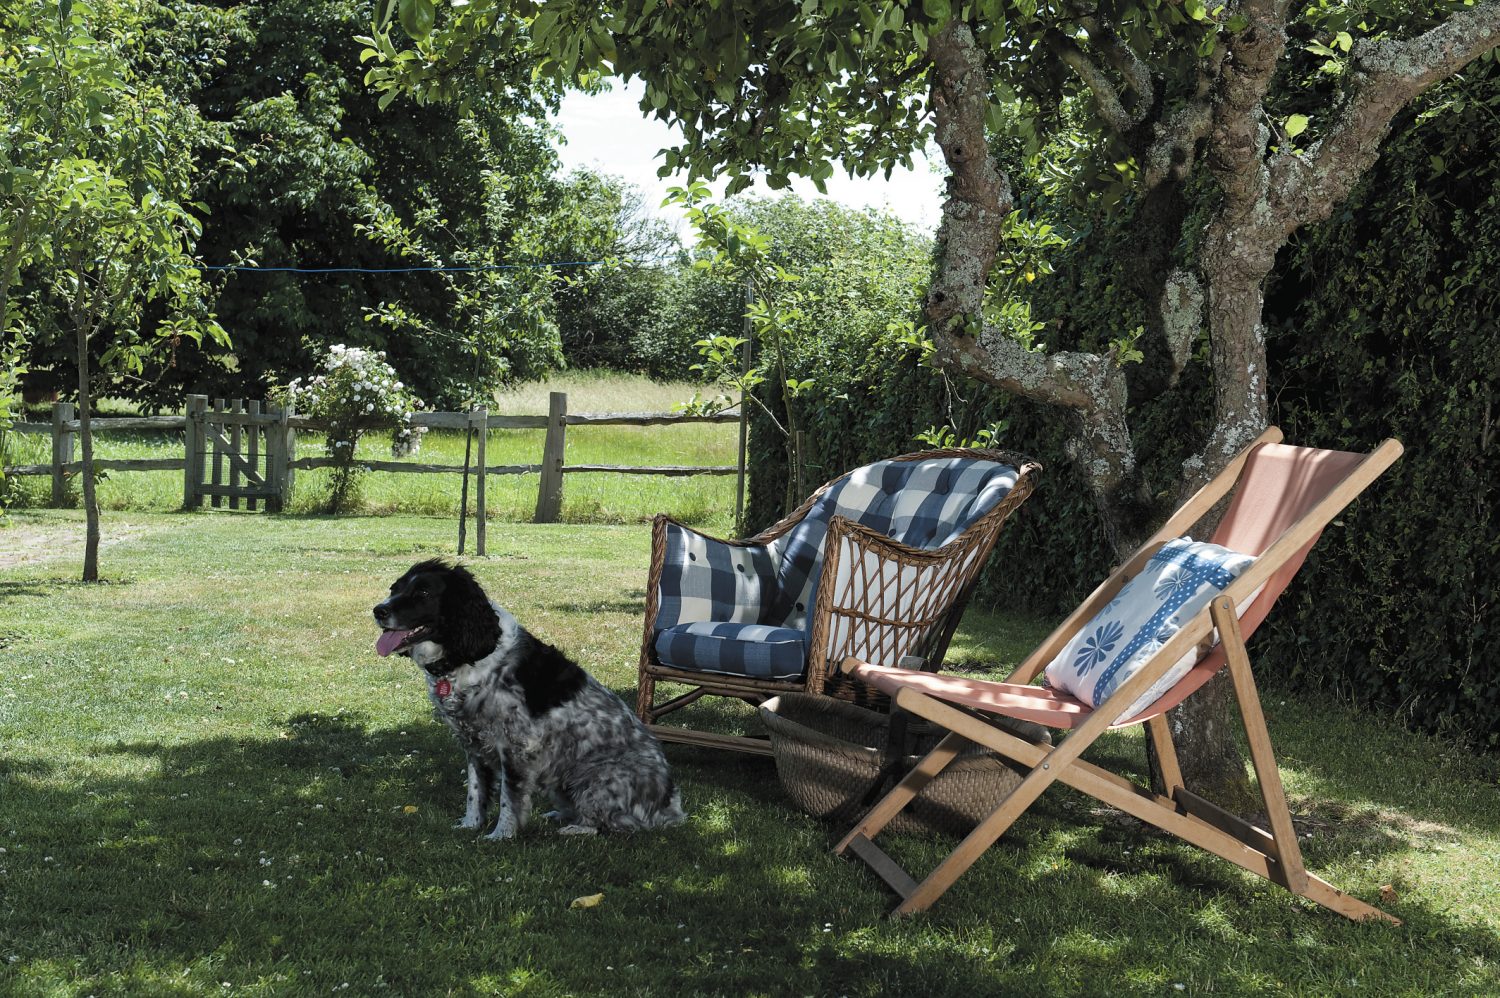 In the shade of a spreading apple tree a deckchair and cane seat have been placed in a conversational group